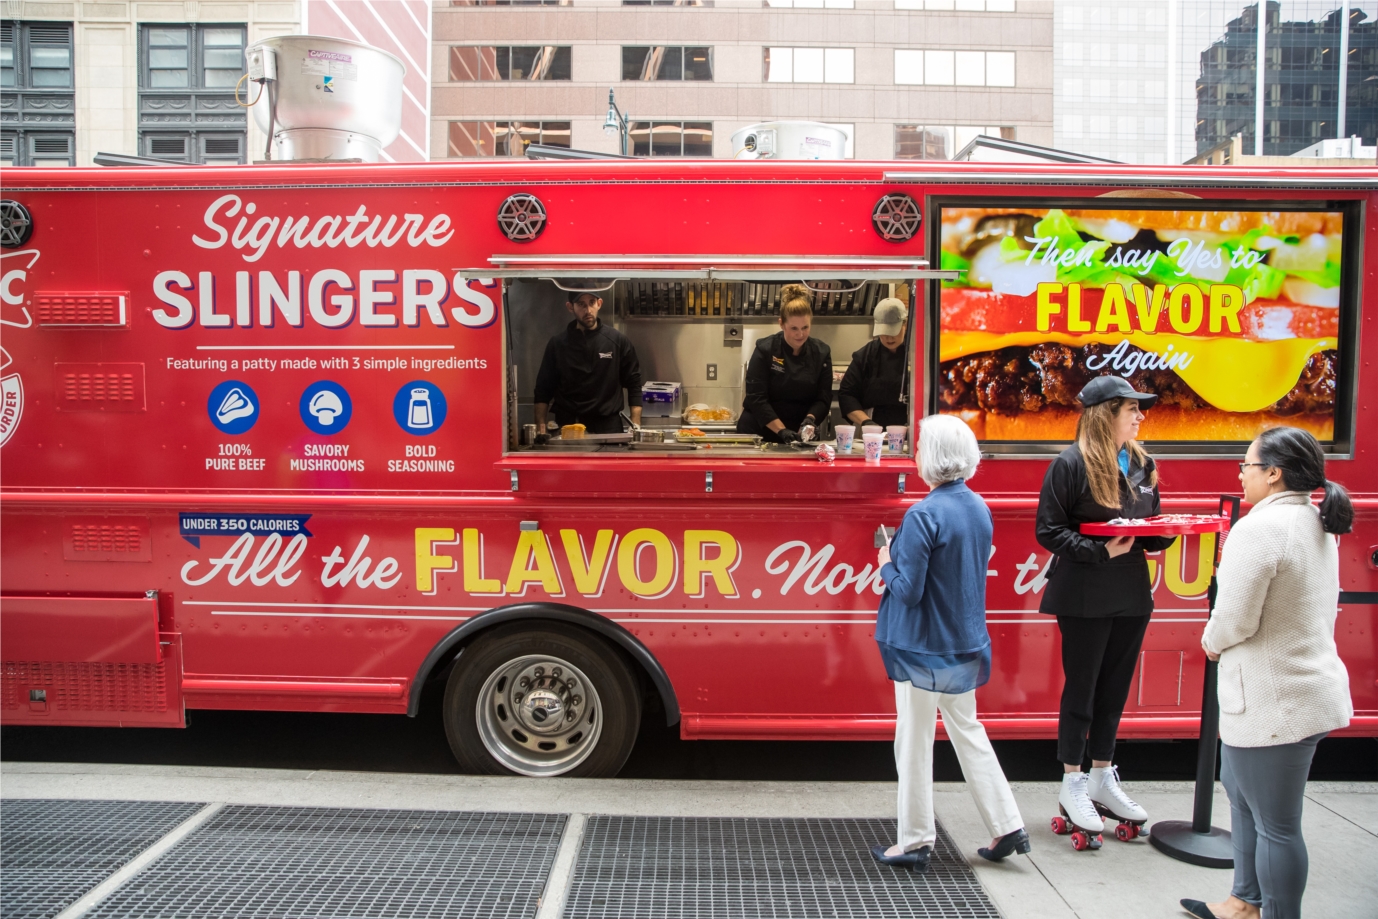 SONIC's Product Innovation team serving Signature Slingers from the SONIC food truck.